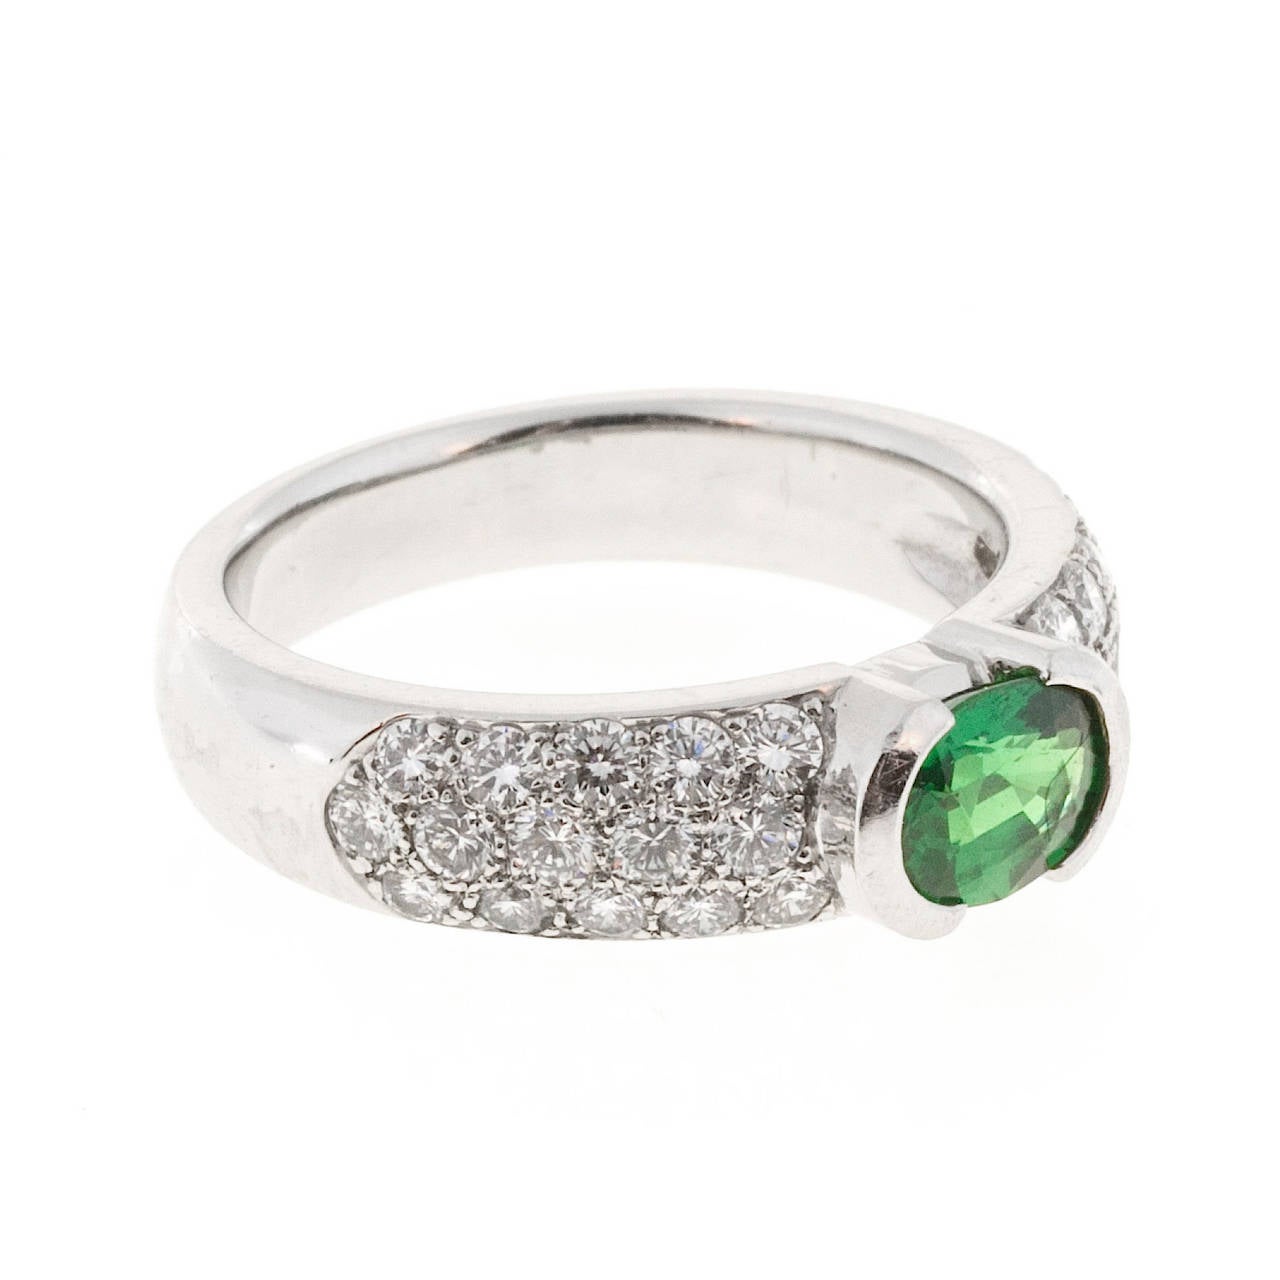 Fine top gem natural oval Tsavorite Garnet in a solid Platinum ring with semi bezel top and pave set sides.

1 oval gem Tsavorite Garnet 7 x 5mm, approx. total weight 1.00ct
30 full cut diamonds, approx. total weight .75cts, F,